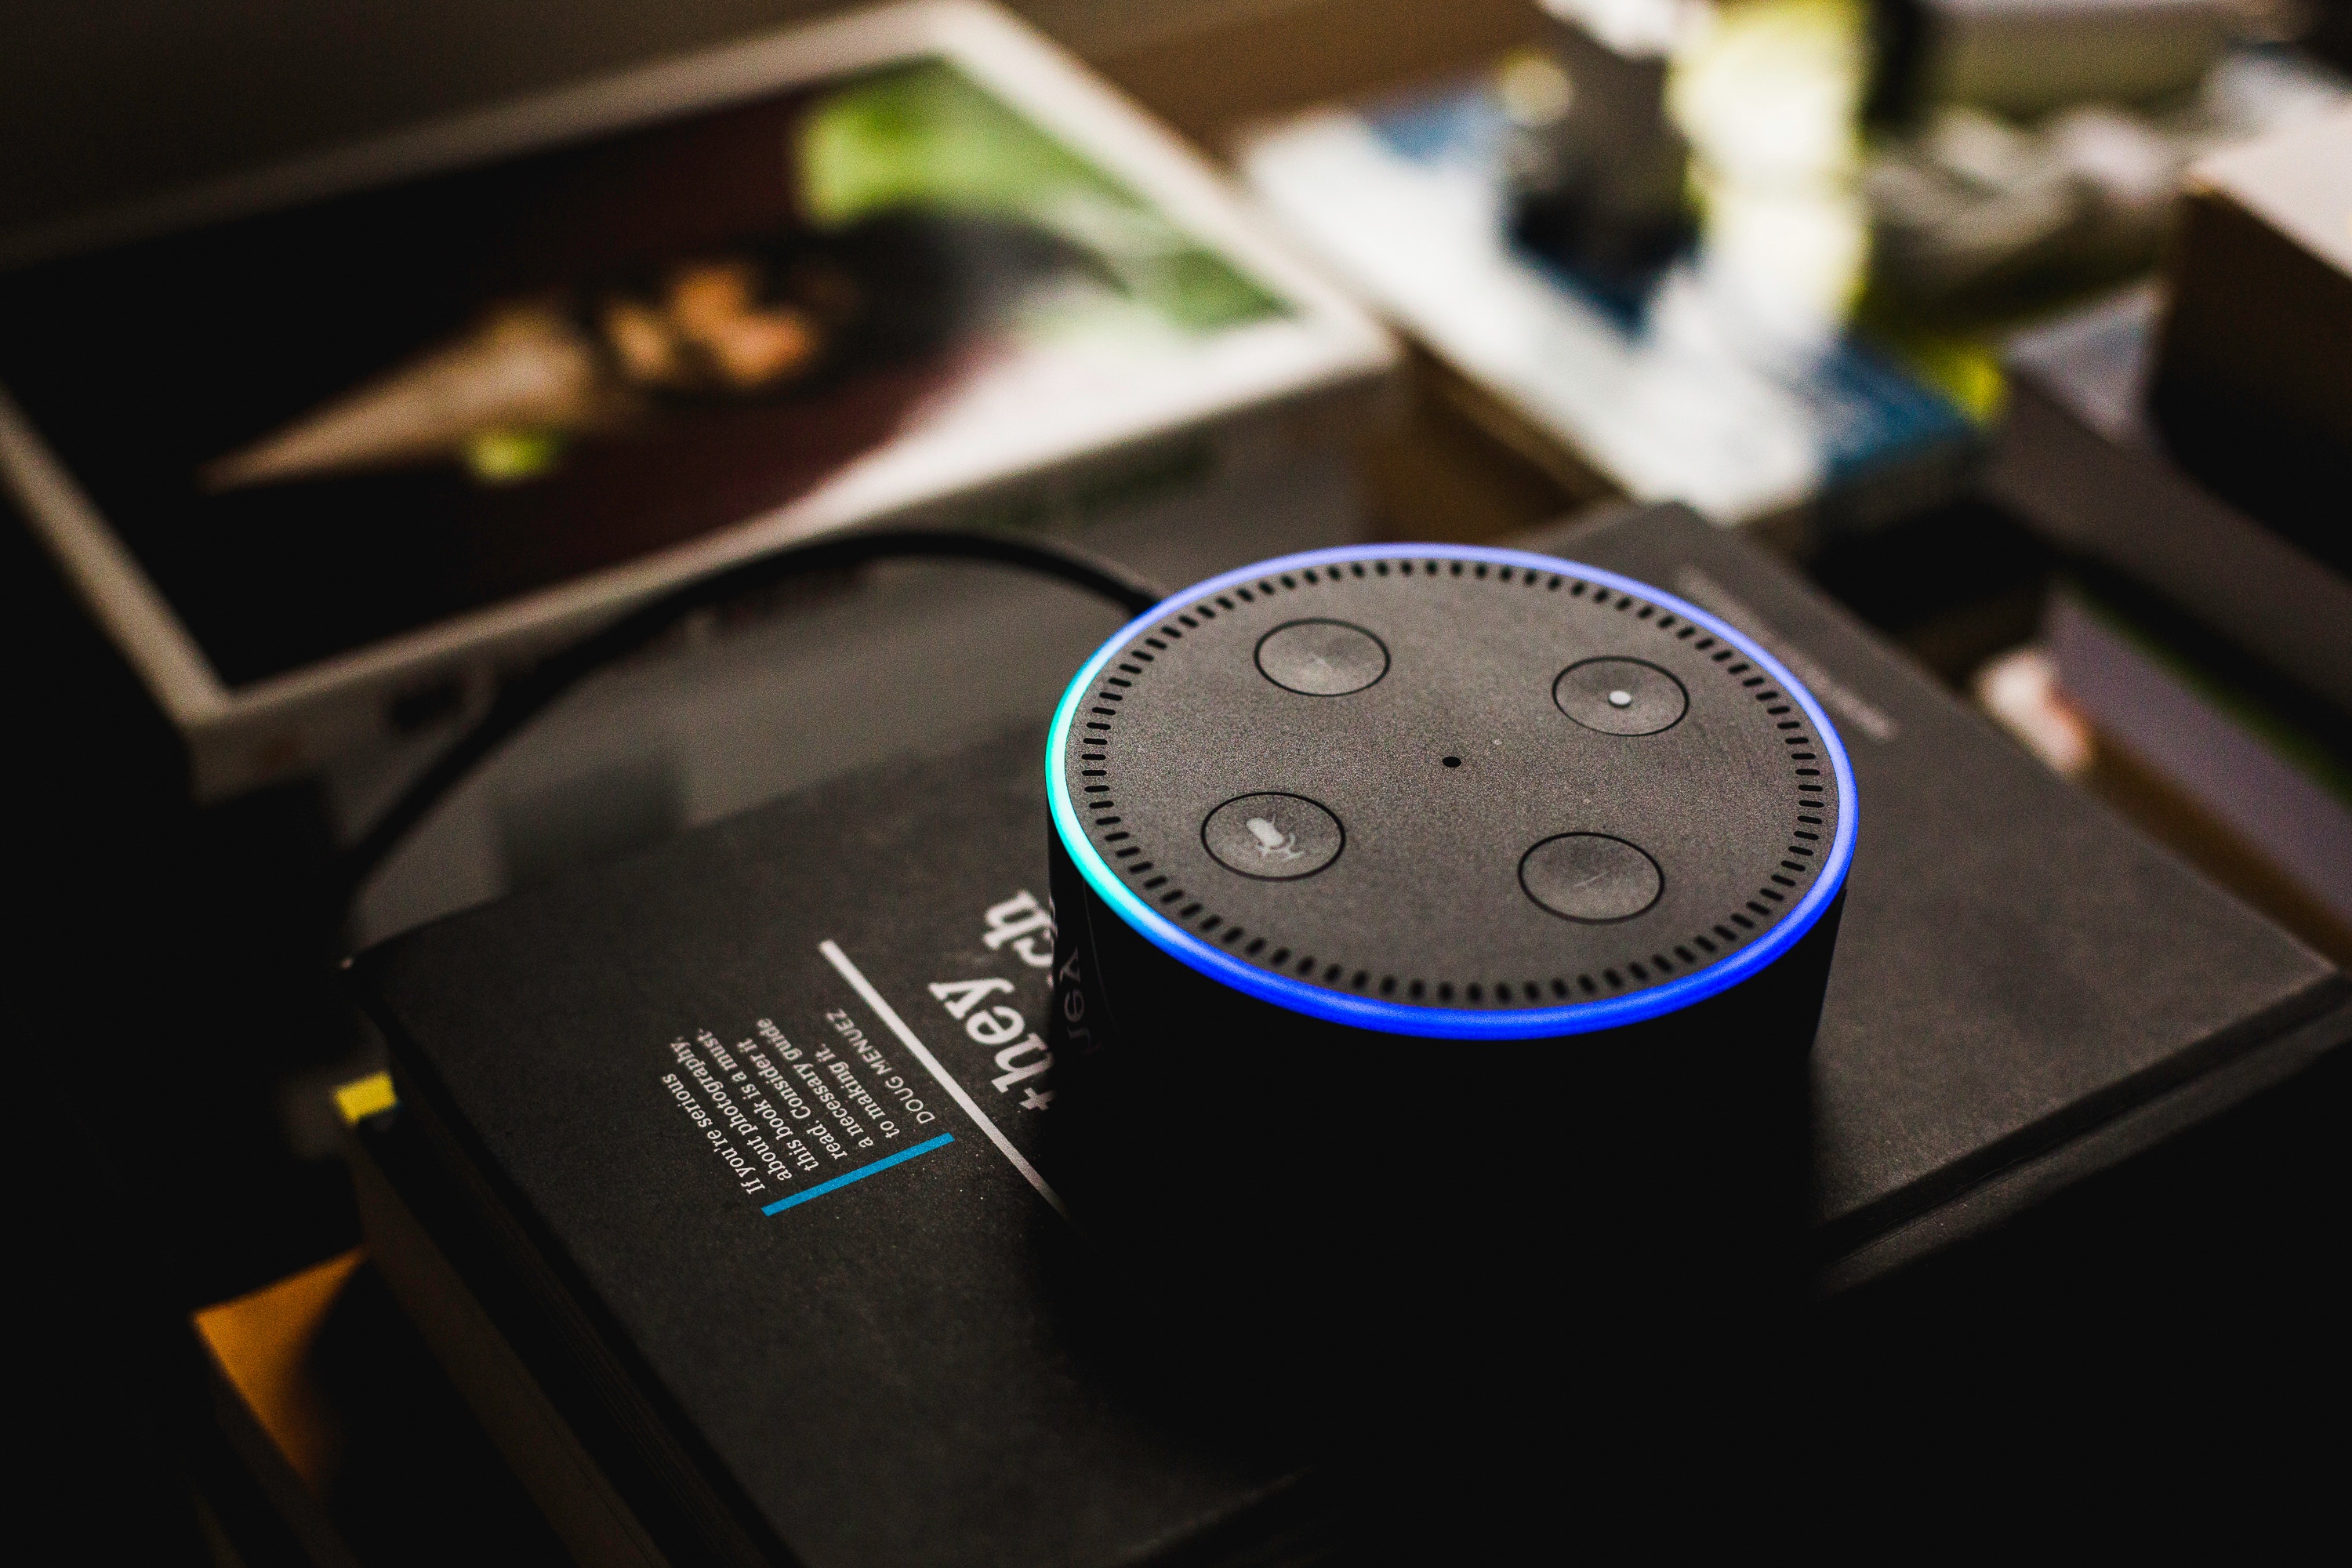 Ever wonder how voice assistants are able to hold a conversation? Check out this article to discover the operations happening behind-the-scenes when a voice assistant is talking!